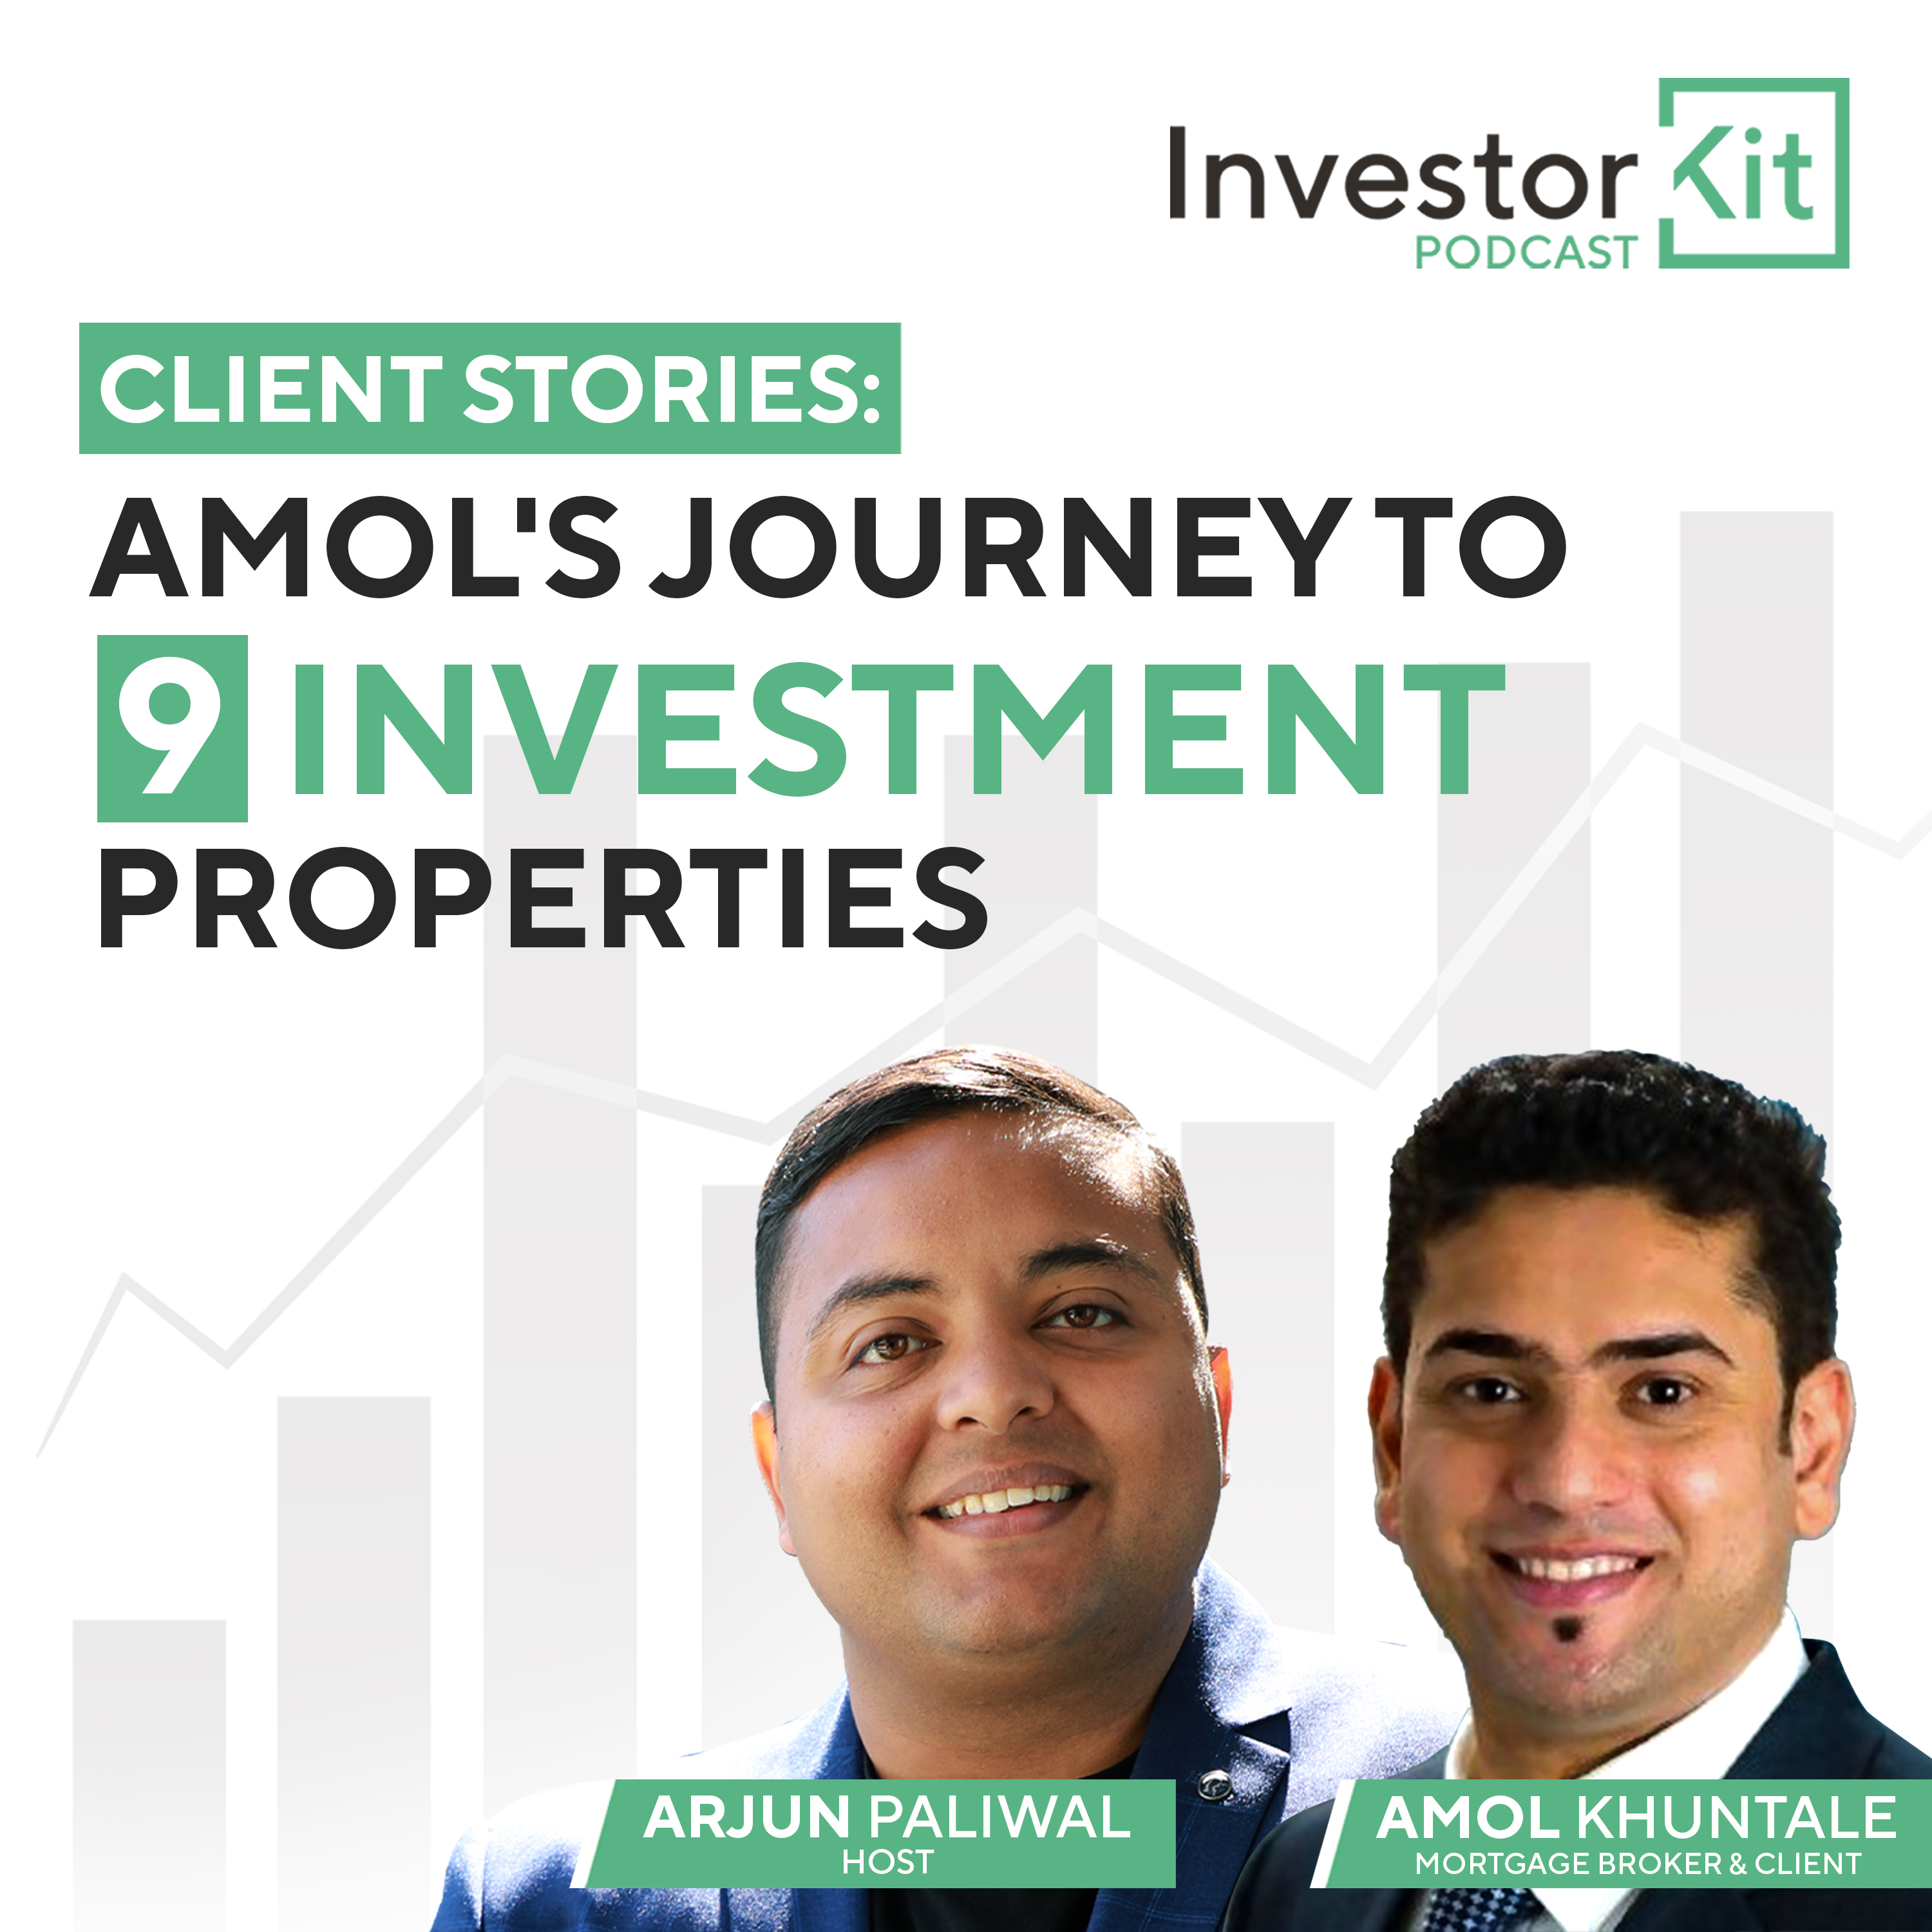 Client Stories: Amol's Journey To 9 Investment Properties